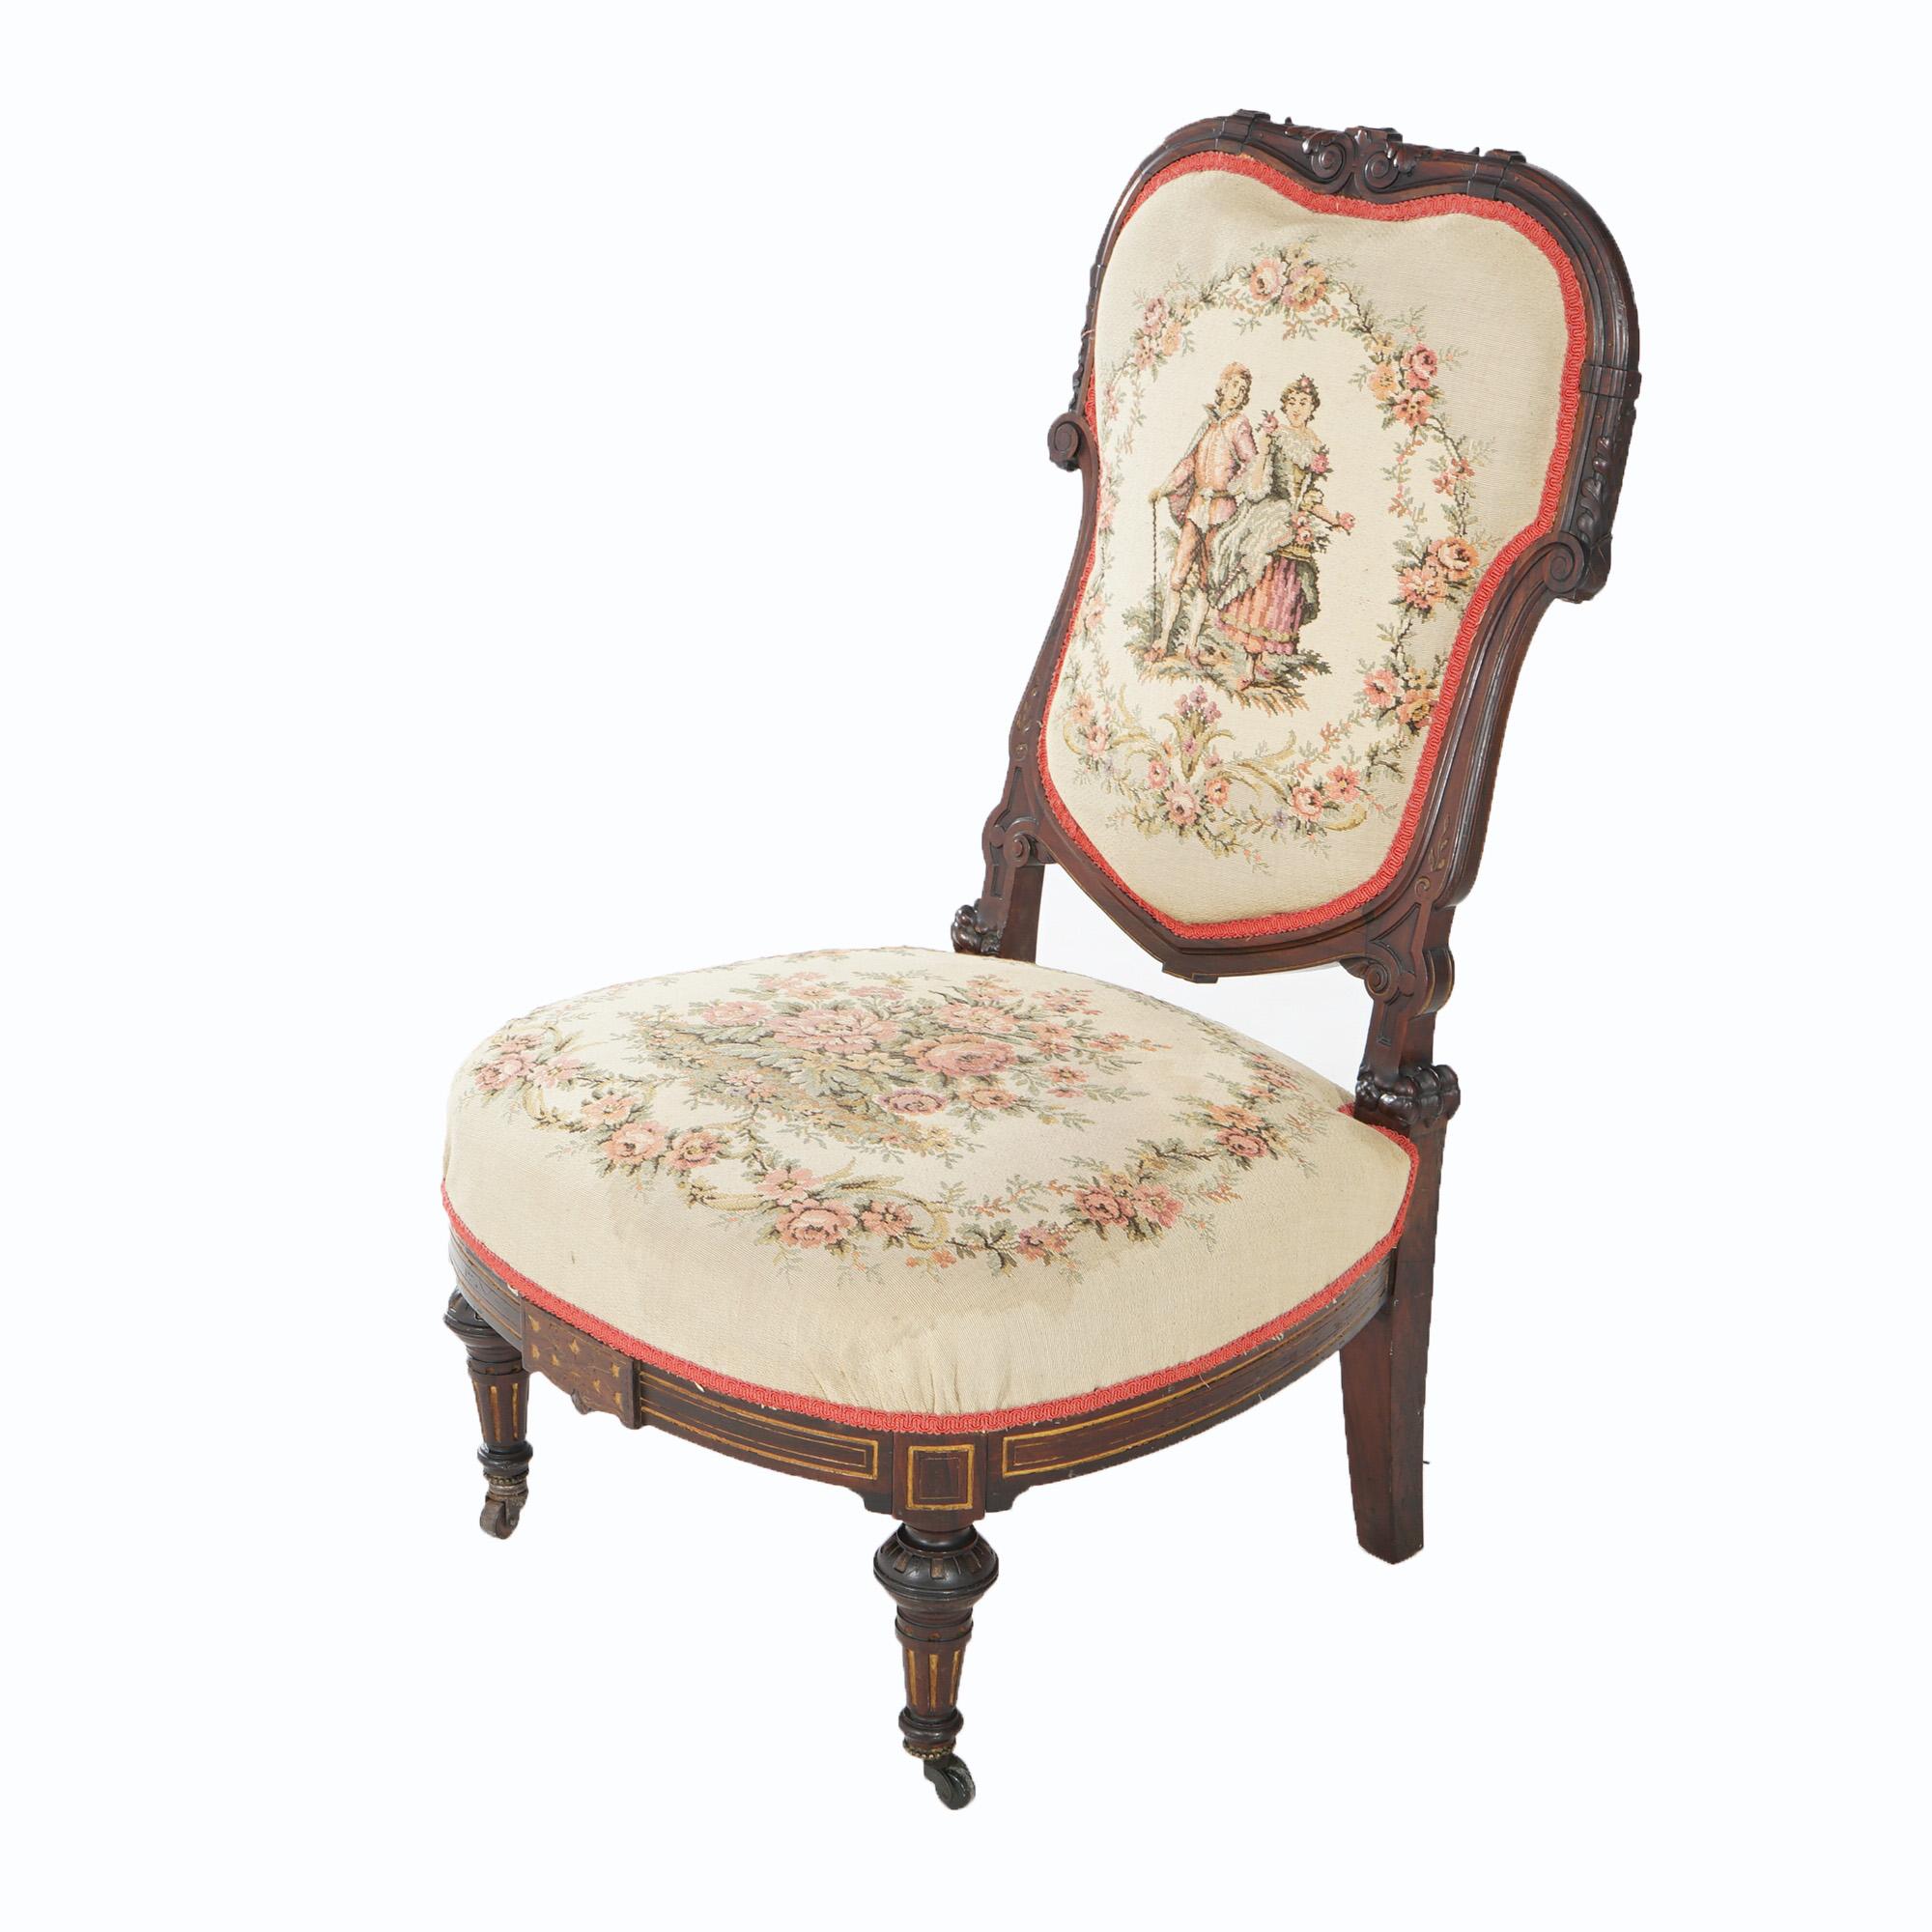 American Antique Victorian Rosewood & Gilt Incised Tapestry Slipper Chair, 19th Century